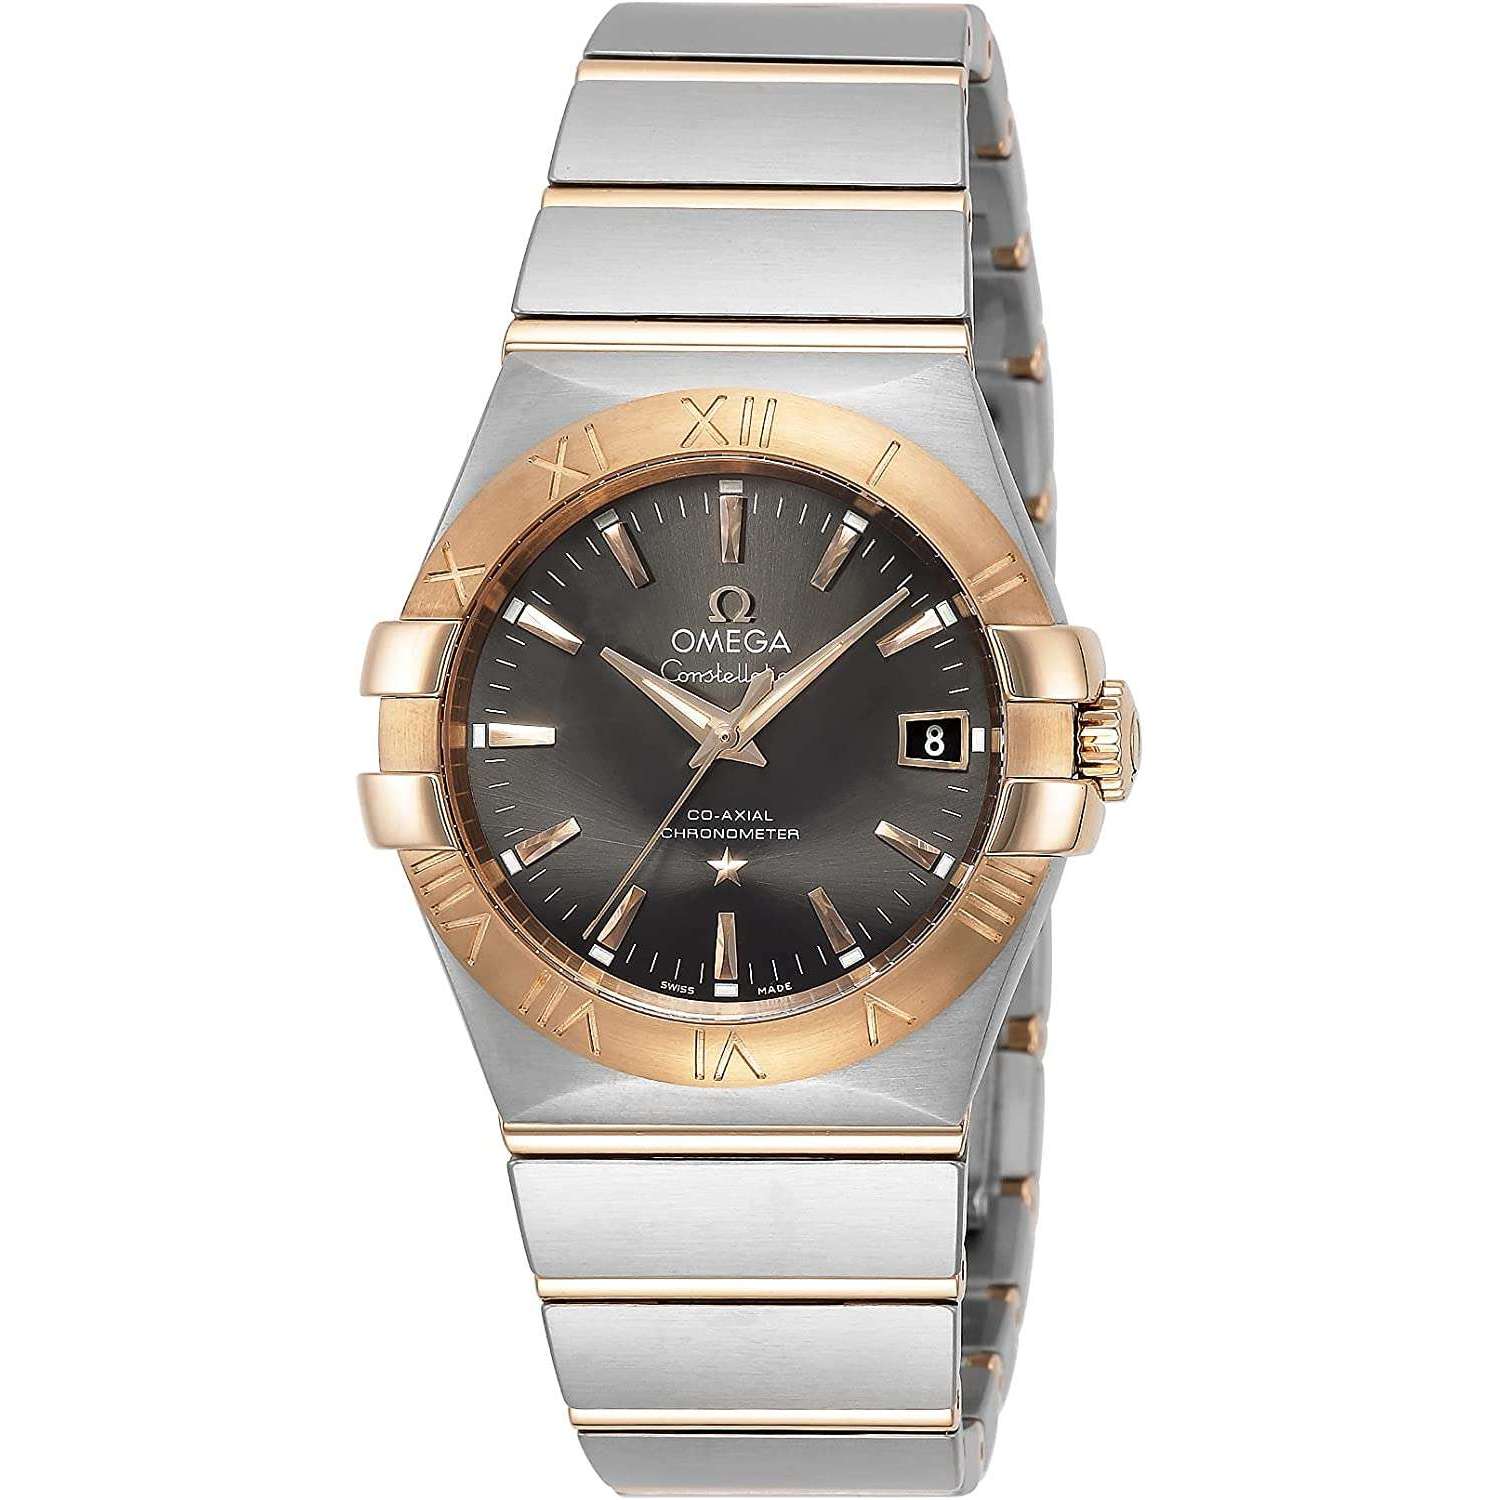 OMEGA CONSTELLATION CO-AXIAL CHRONOMETER 34 MM MEN WATCH 123.20.35.20.06.002 - ROOK JAPAN